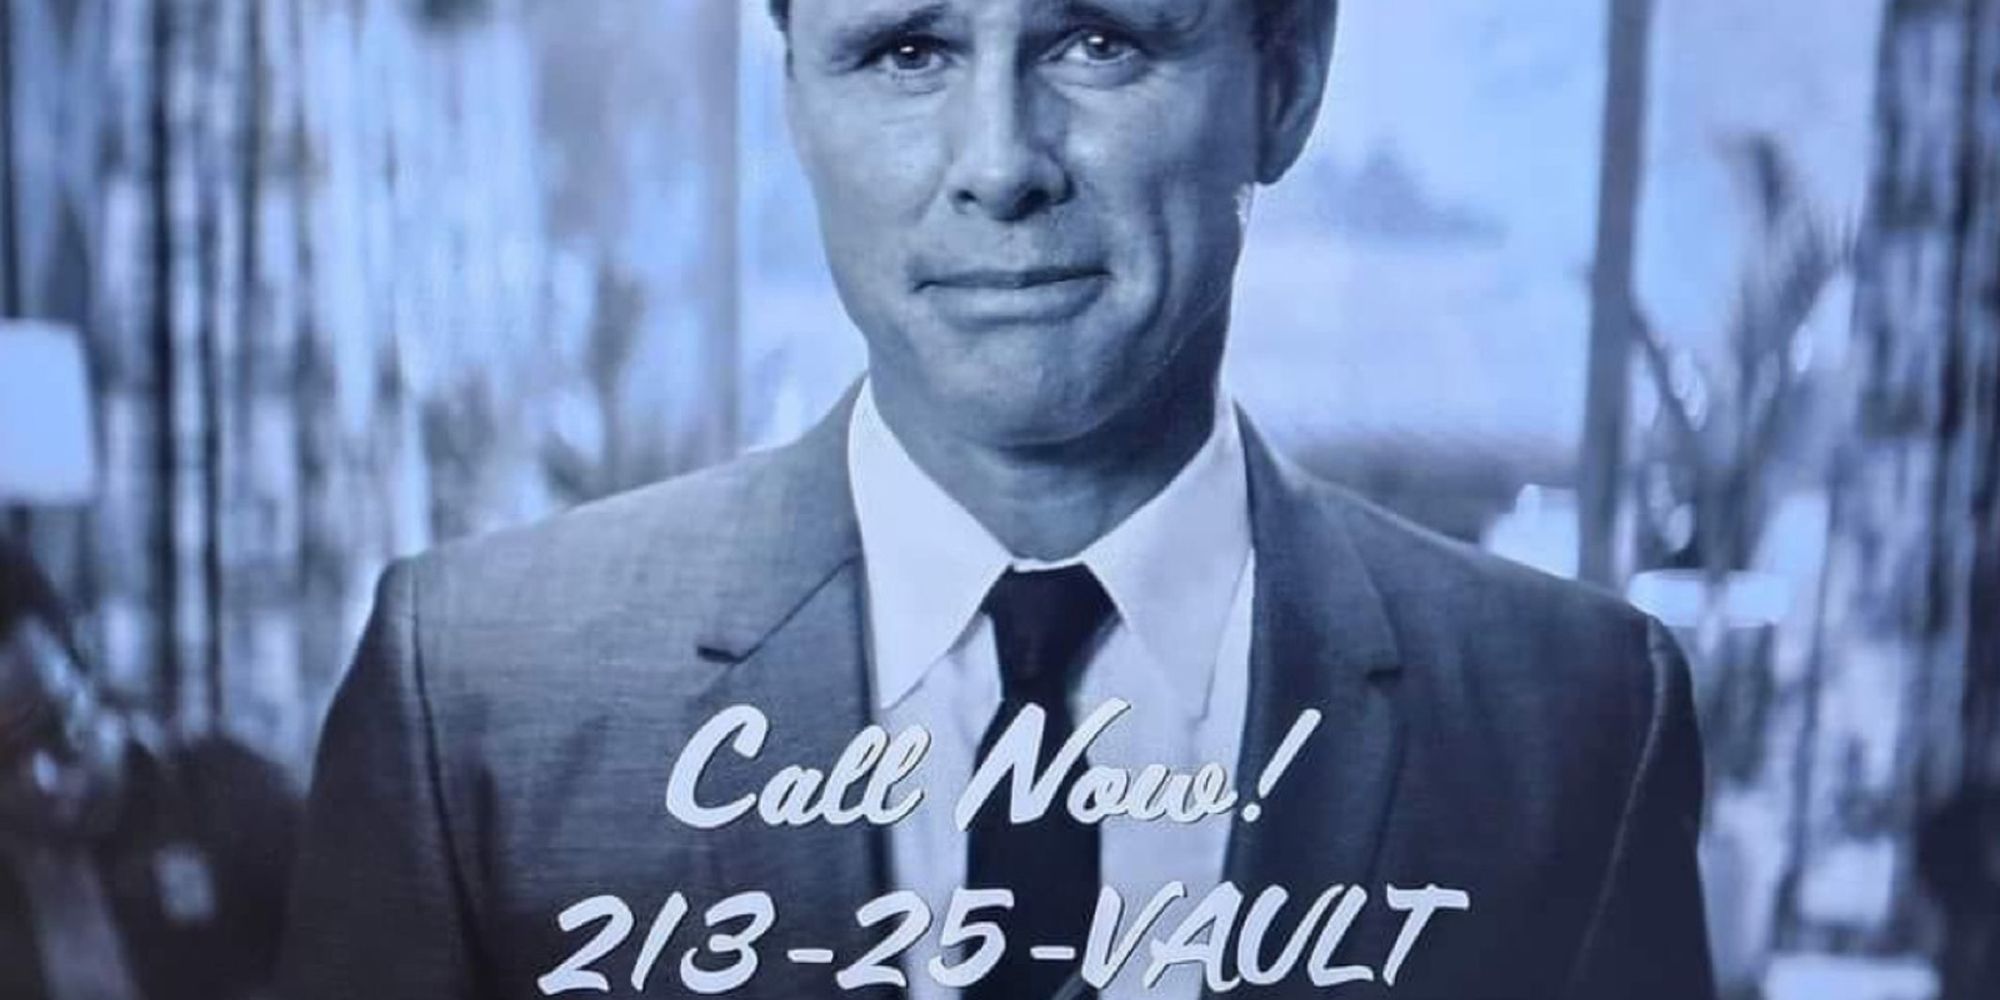 Walter Goggins character in Fallout series during an infomercial with the text Call Now 213-25-VAULT on the bottom